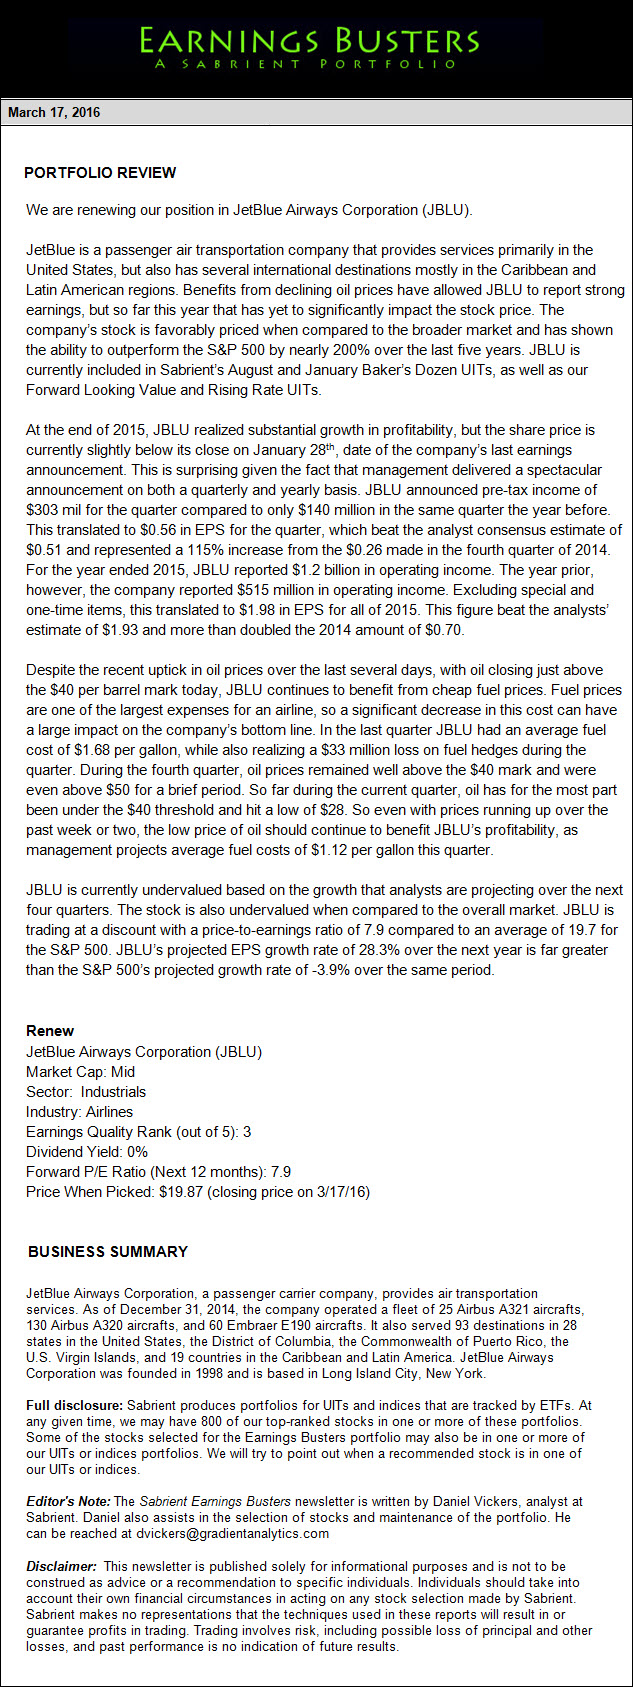 Earnings Busters Newsletter - March 17, 2016